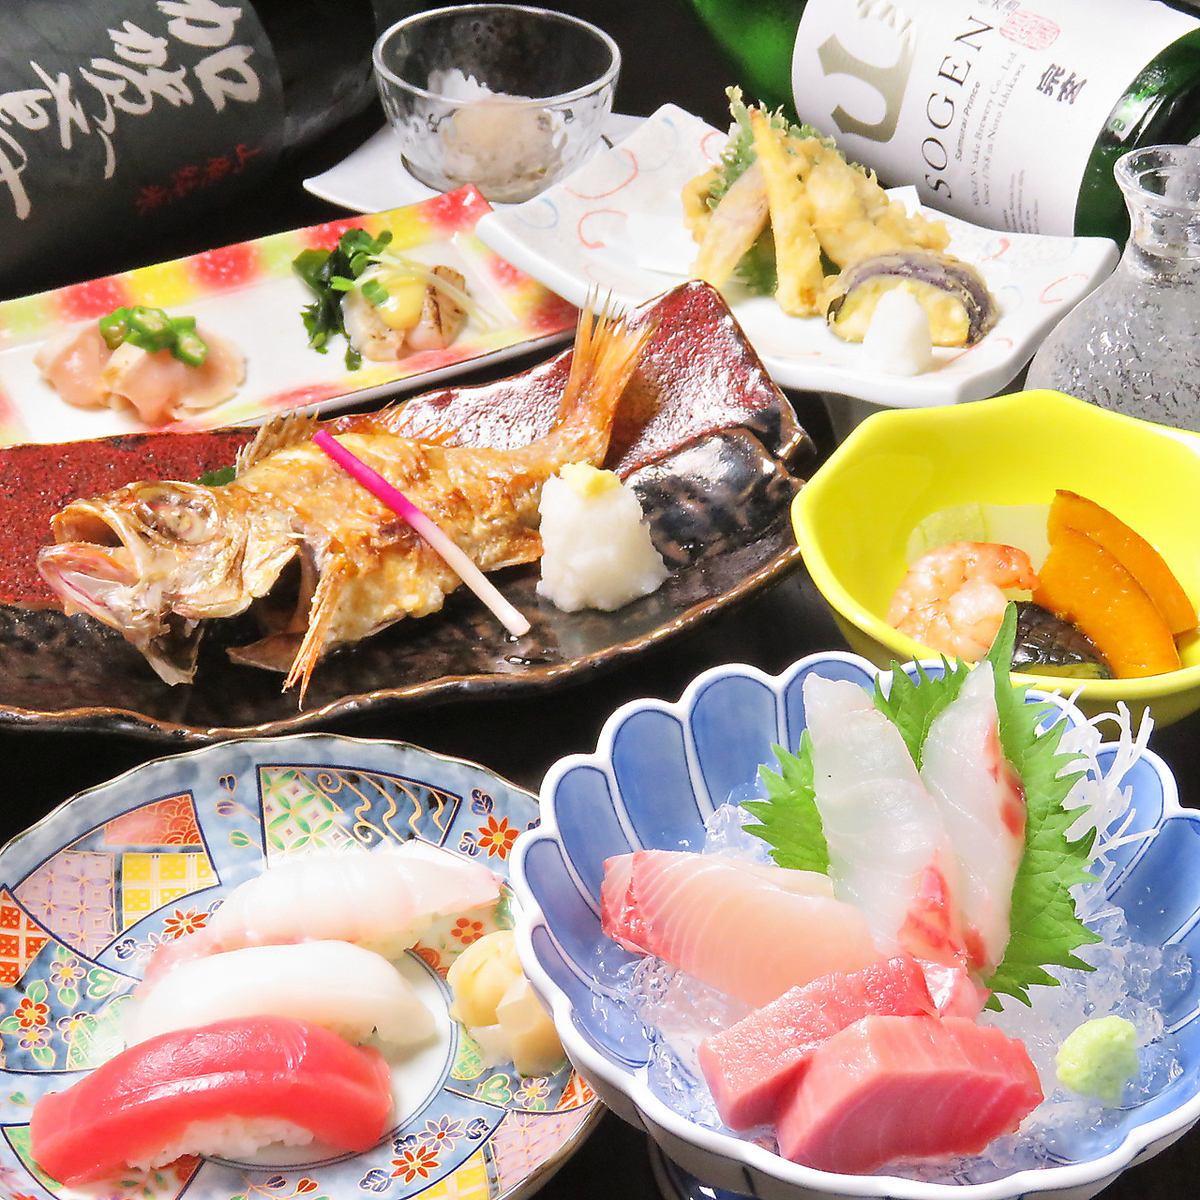 Have a fun party with fresh seafood, local cuisine, and delicious local sake! Banquets can accommodate up to 50 people (private rooms available)